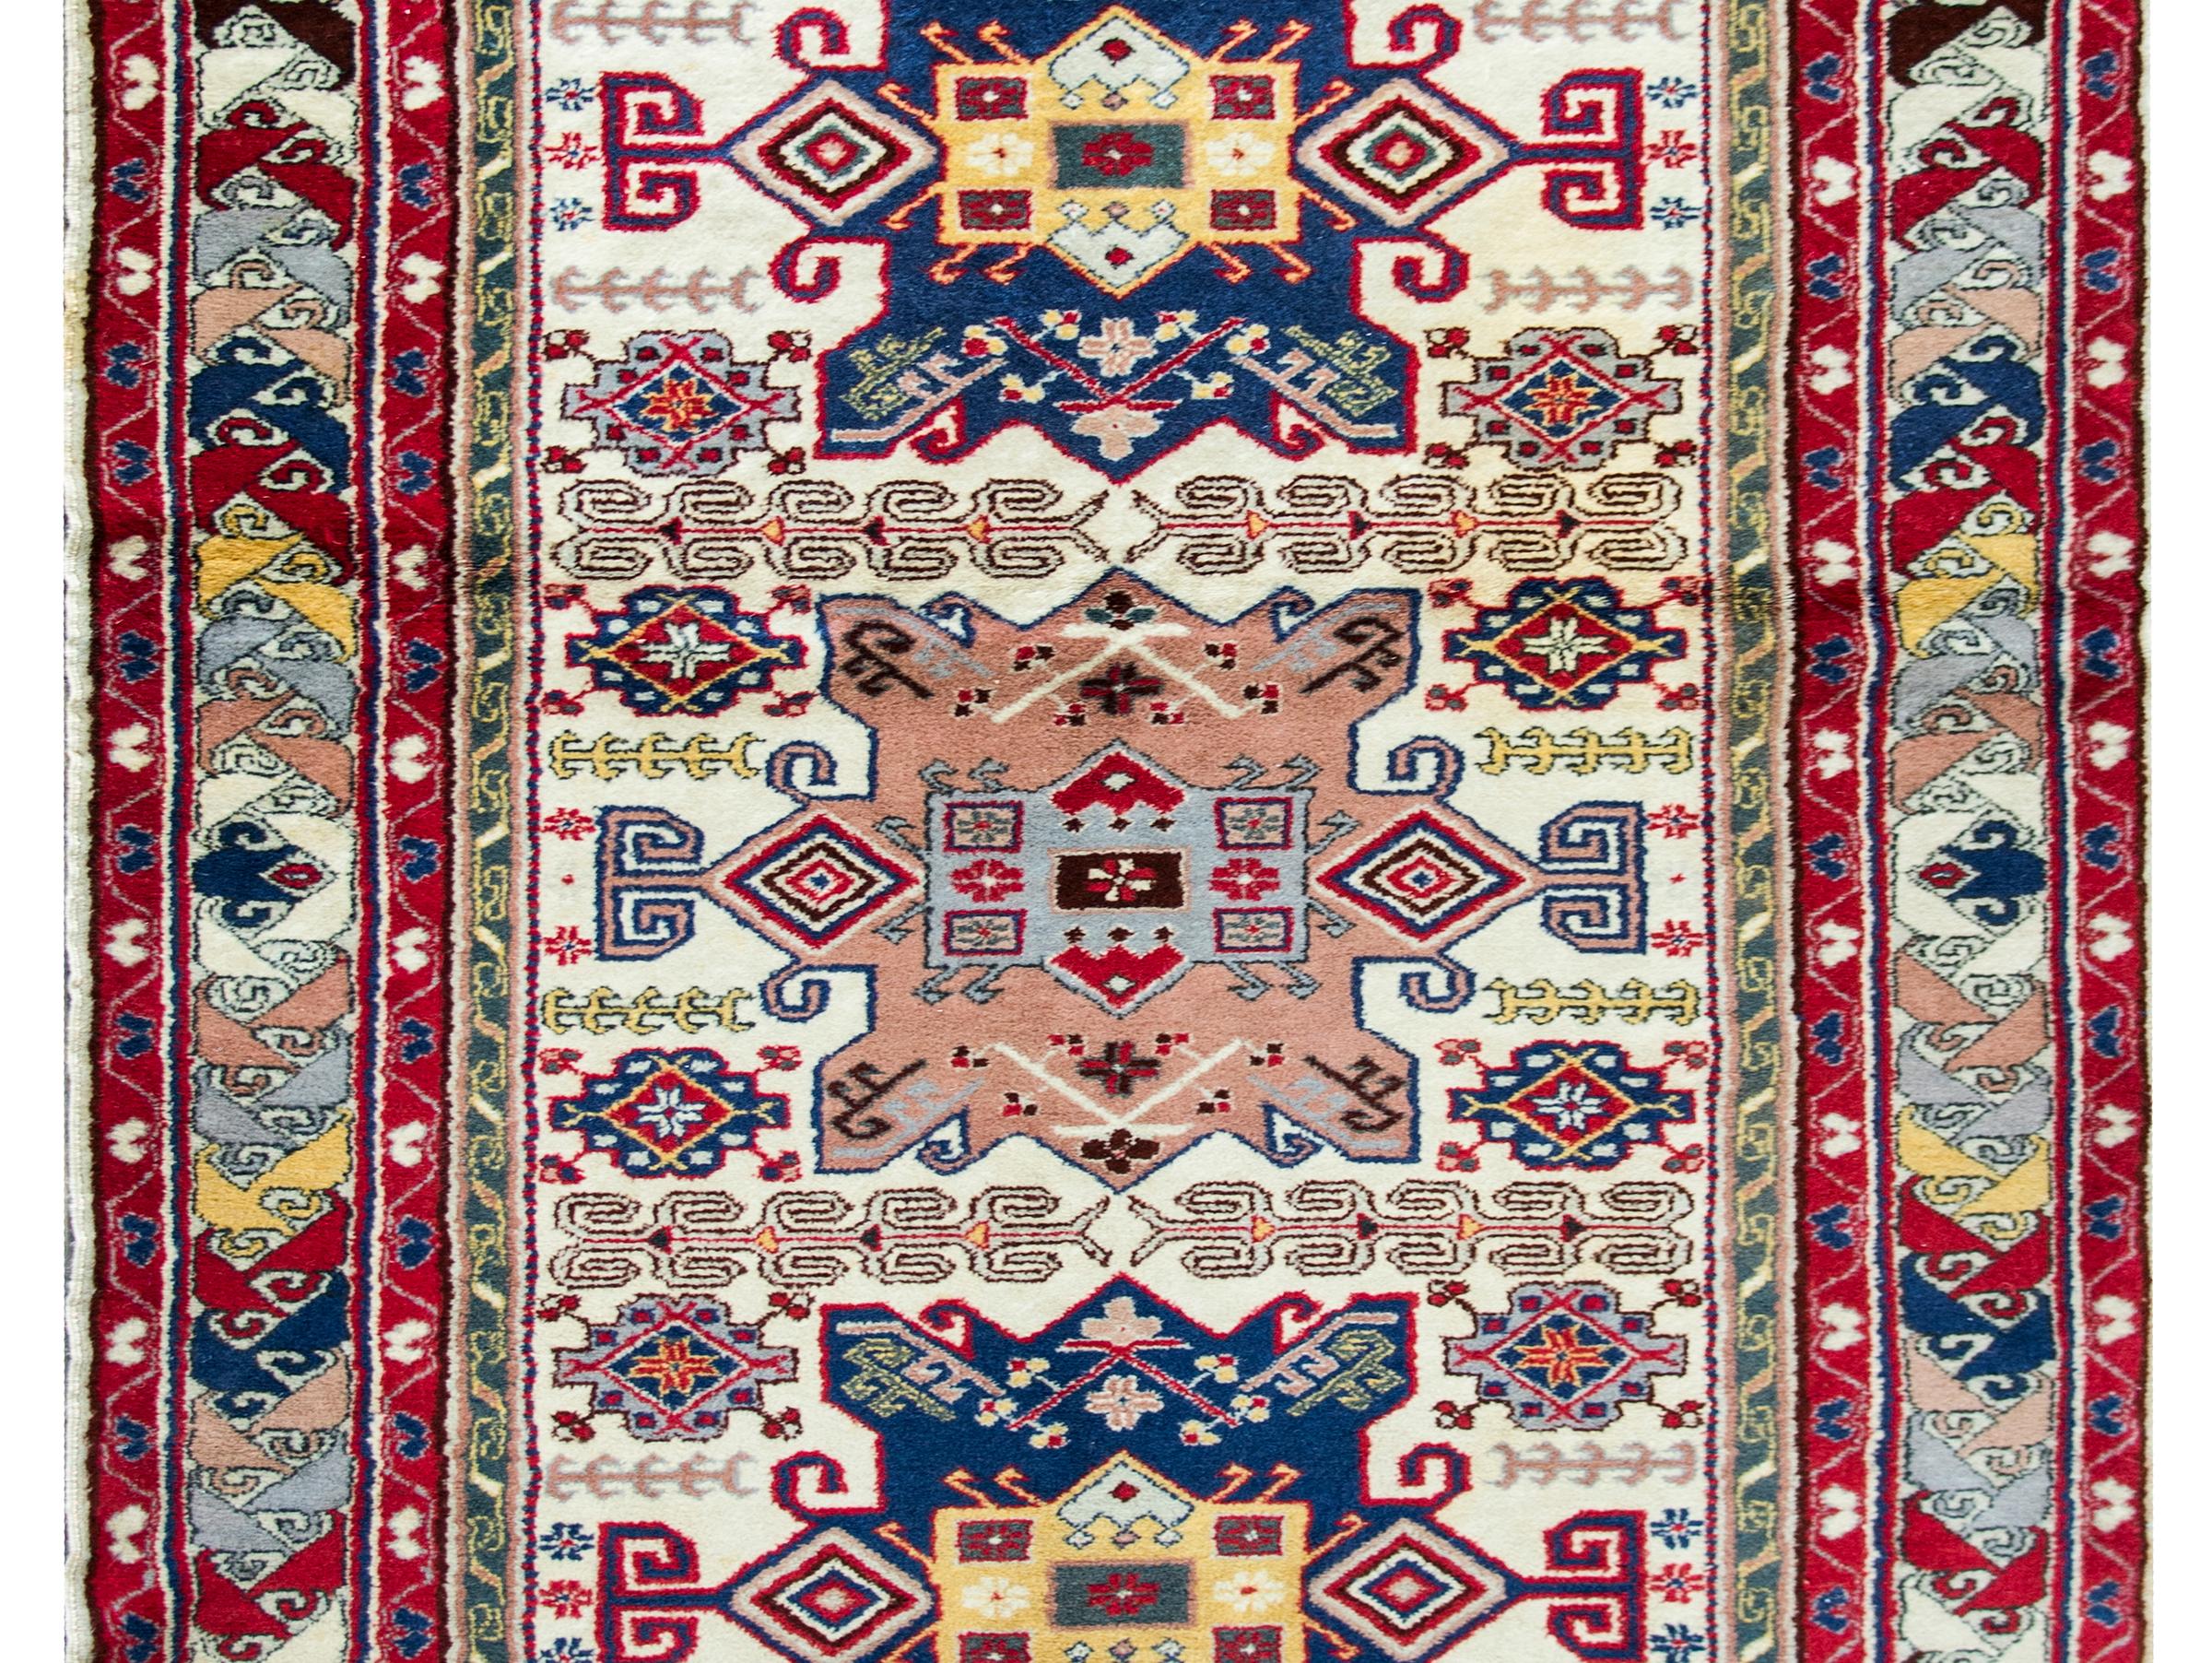 A wonderful late 20th century Persian Ardebil rug with three large stylized floral medallions amidst a field of densely woven stylized flowers and vines, and surrounded by a fantastic wide border with a large stylized floral pattern flanked by pairs